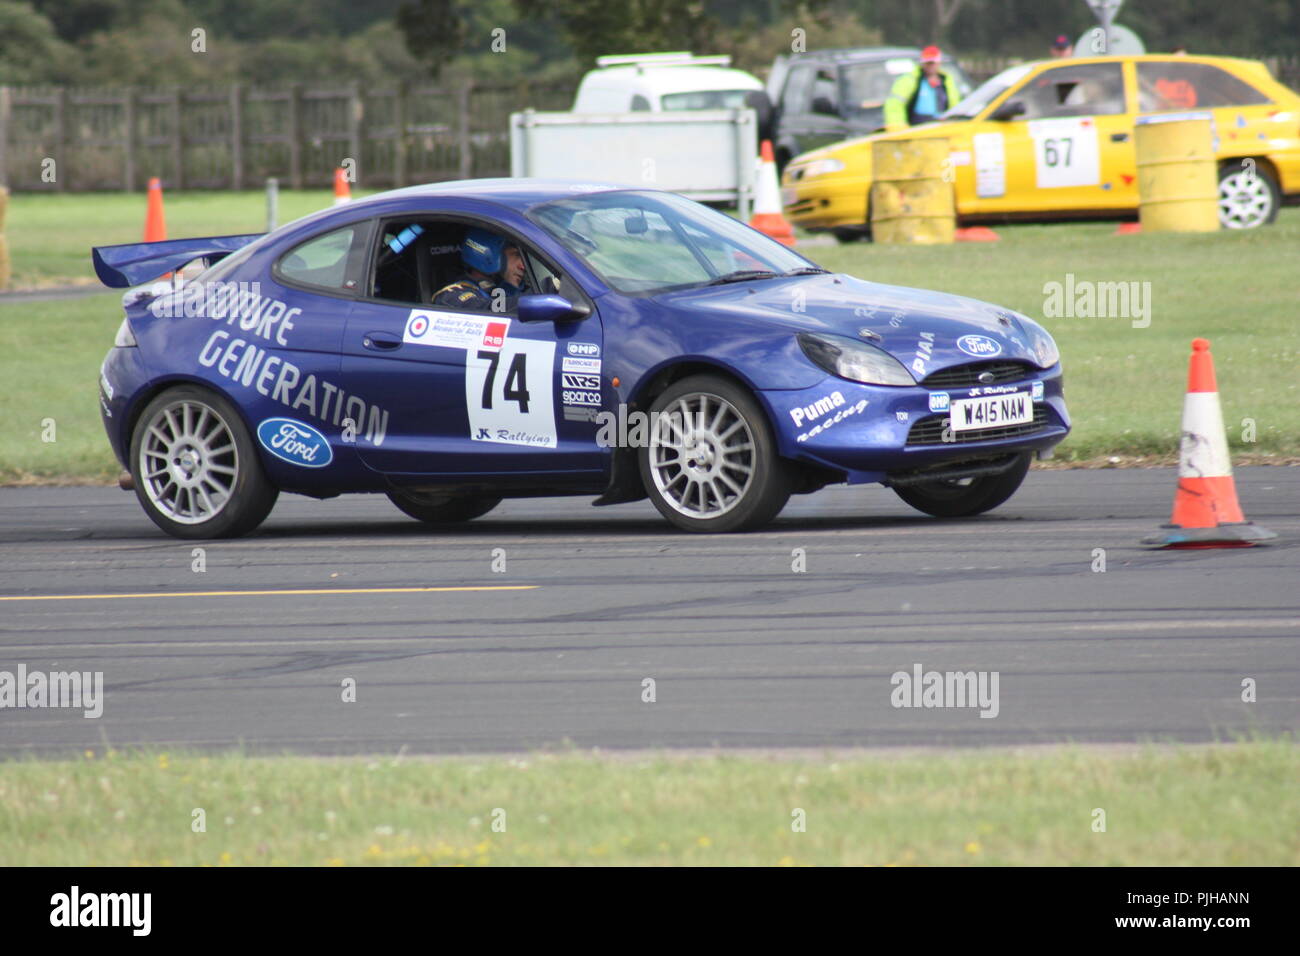 Ford Racing Puma High Resolution Stock Photography and Images - Alamy